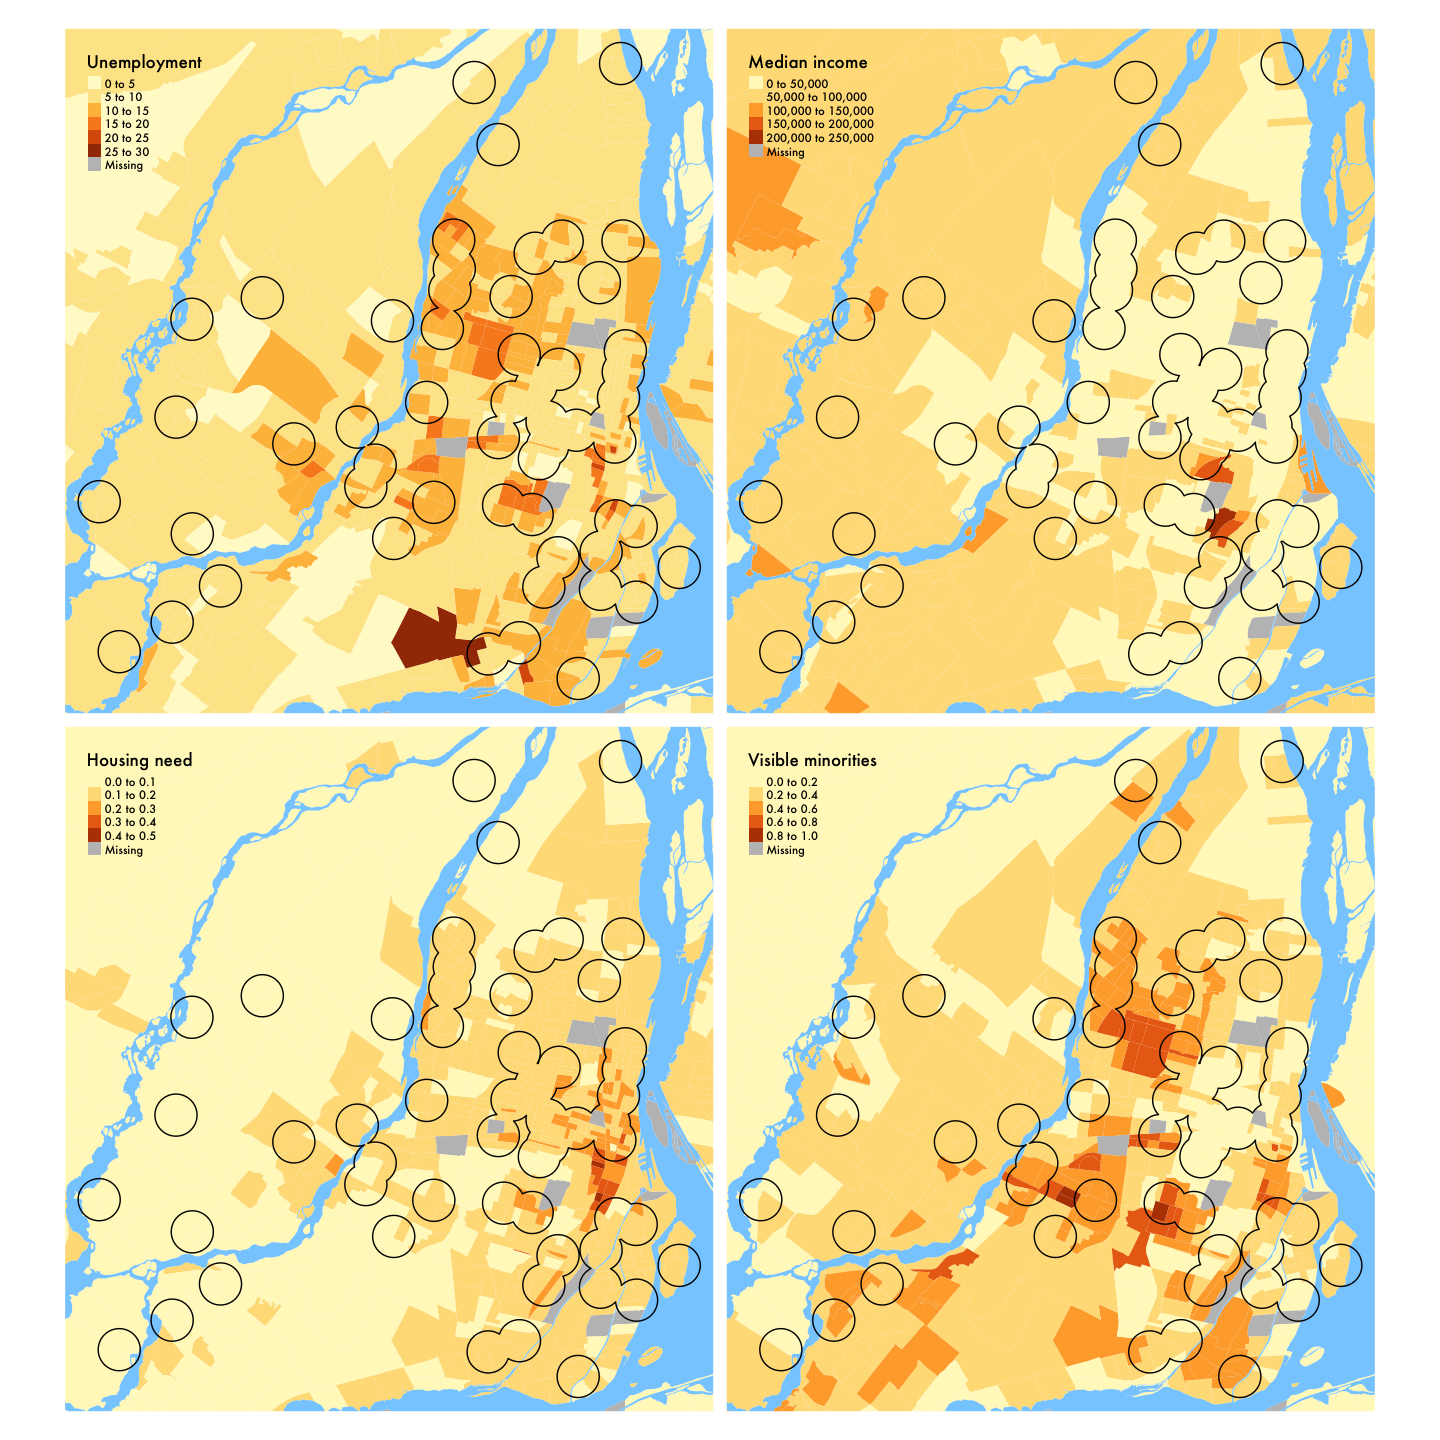 Demographic variables in Montreal (library service area), 2016